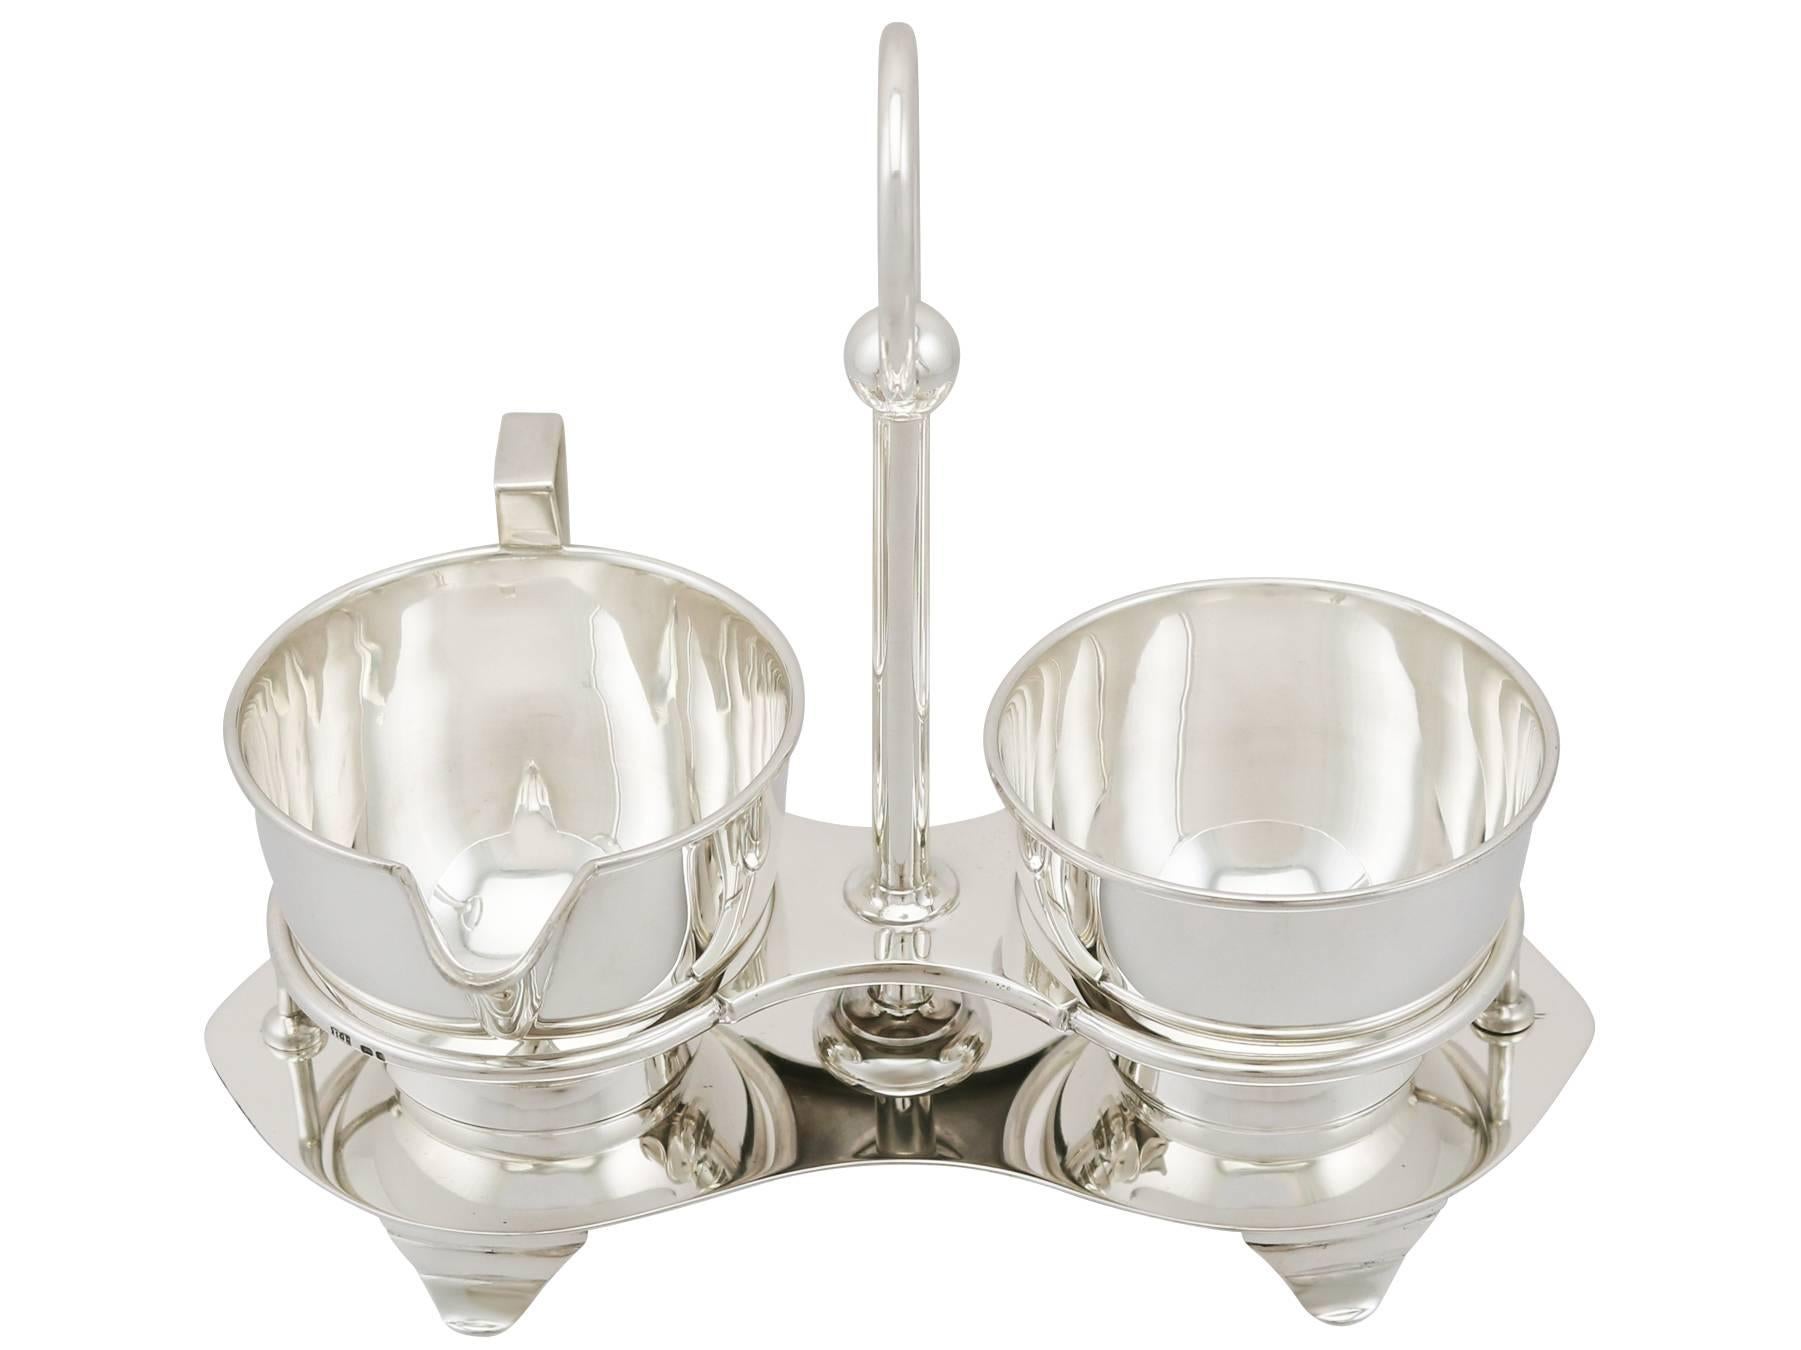 An exceptional, fine and impressive antique Edward VIII English sterling silver cream and sugar set; an addition to our antique teaware collection

This exceptional antique Victorian sterling silver cream and sugar compendium consists of a cream